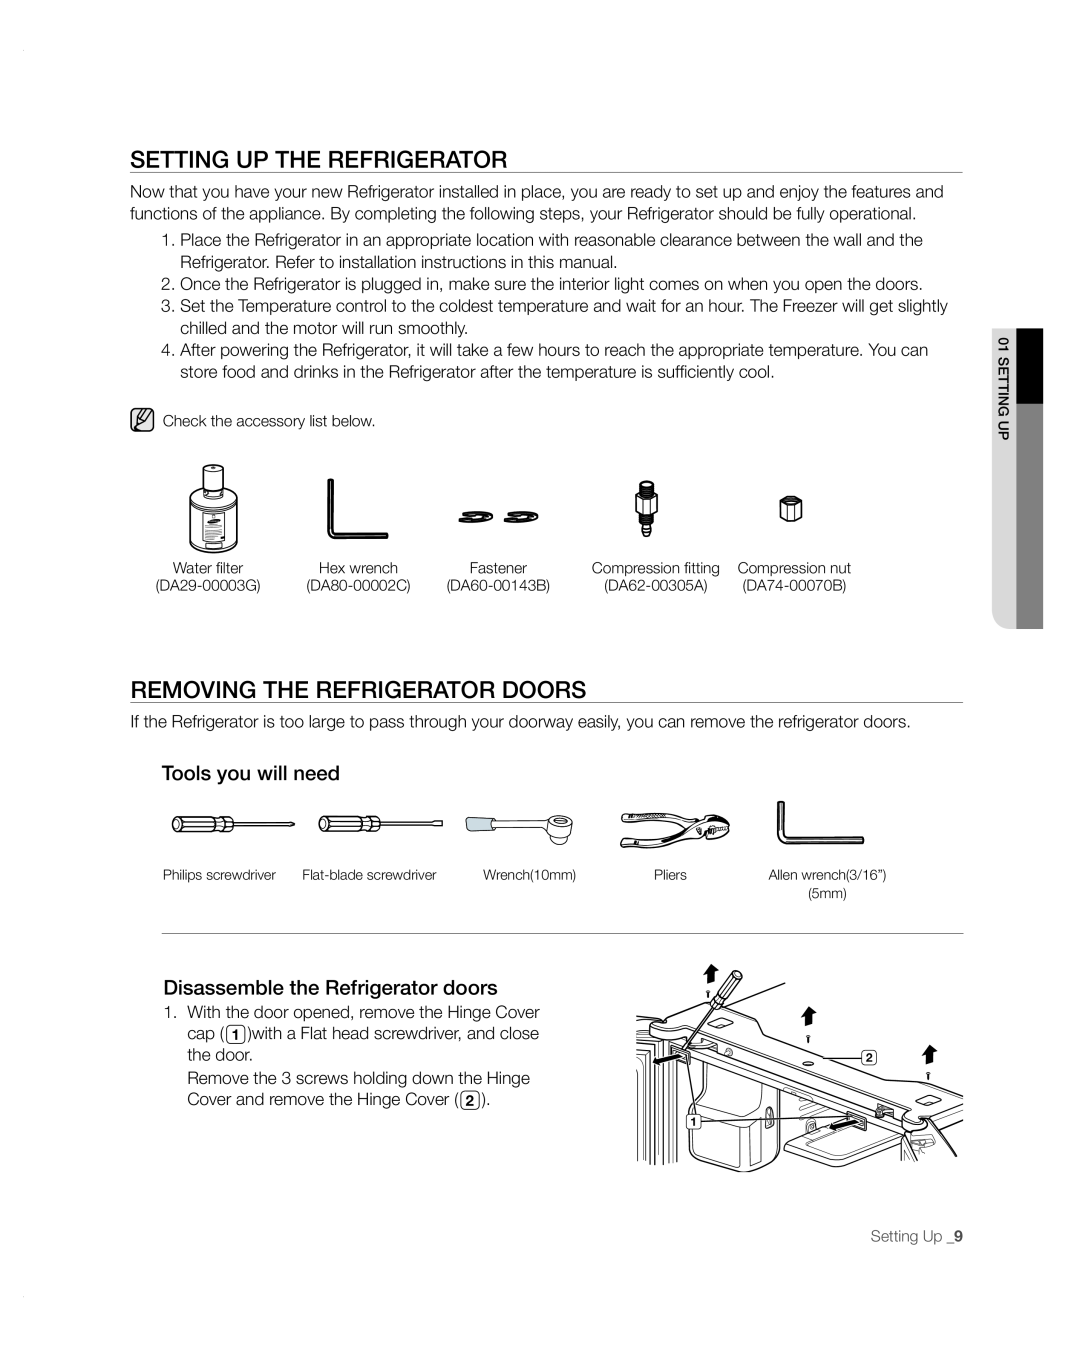 Samsung RFG297AARS/XAA user manual setting uP tHe ReFRigeRAtoR, Removing the refrigerator doors, Tools you will need 